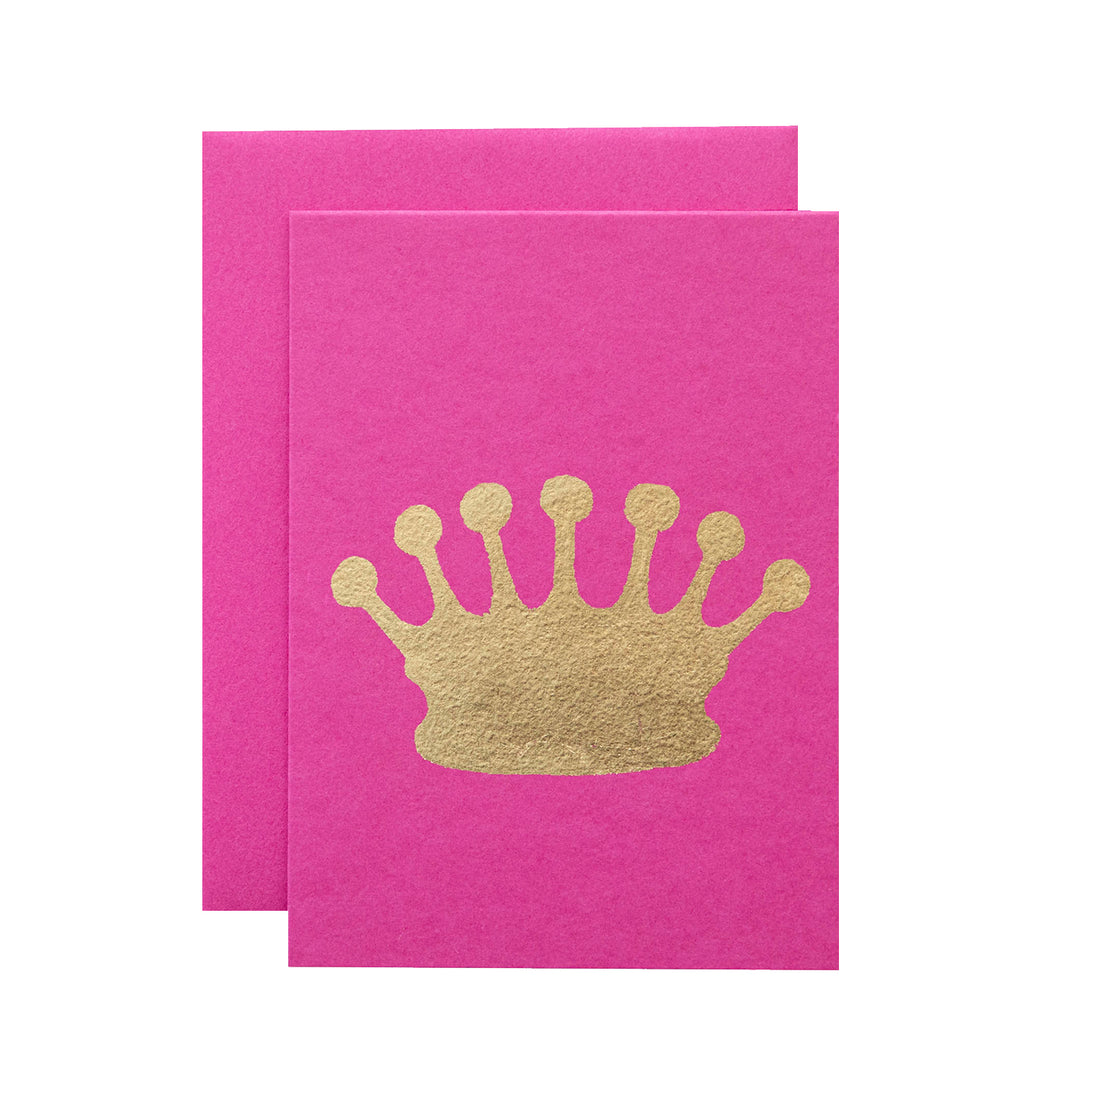 A pink card featuring the silhouette of a crown in solid gold leaf.